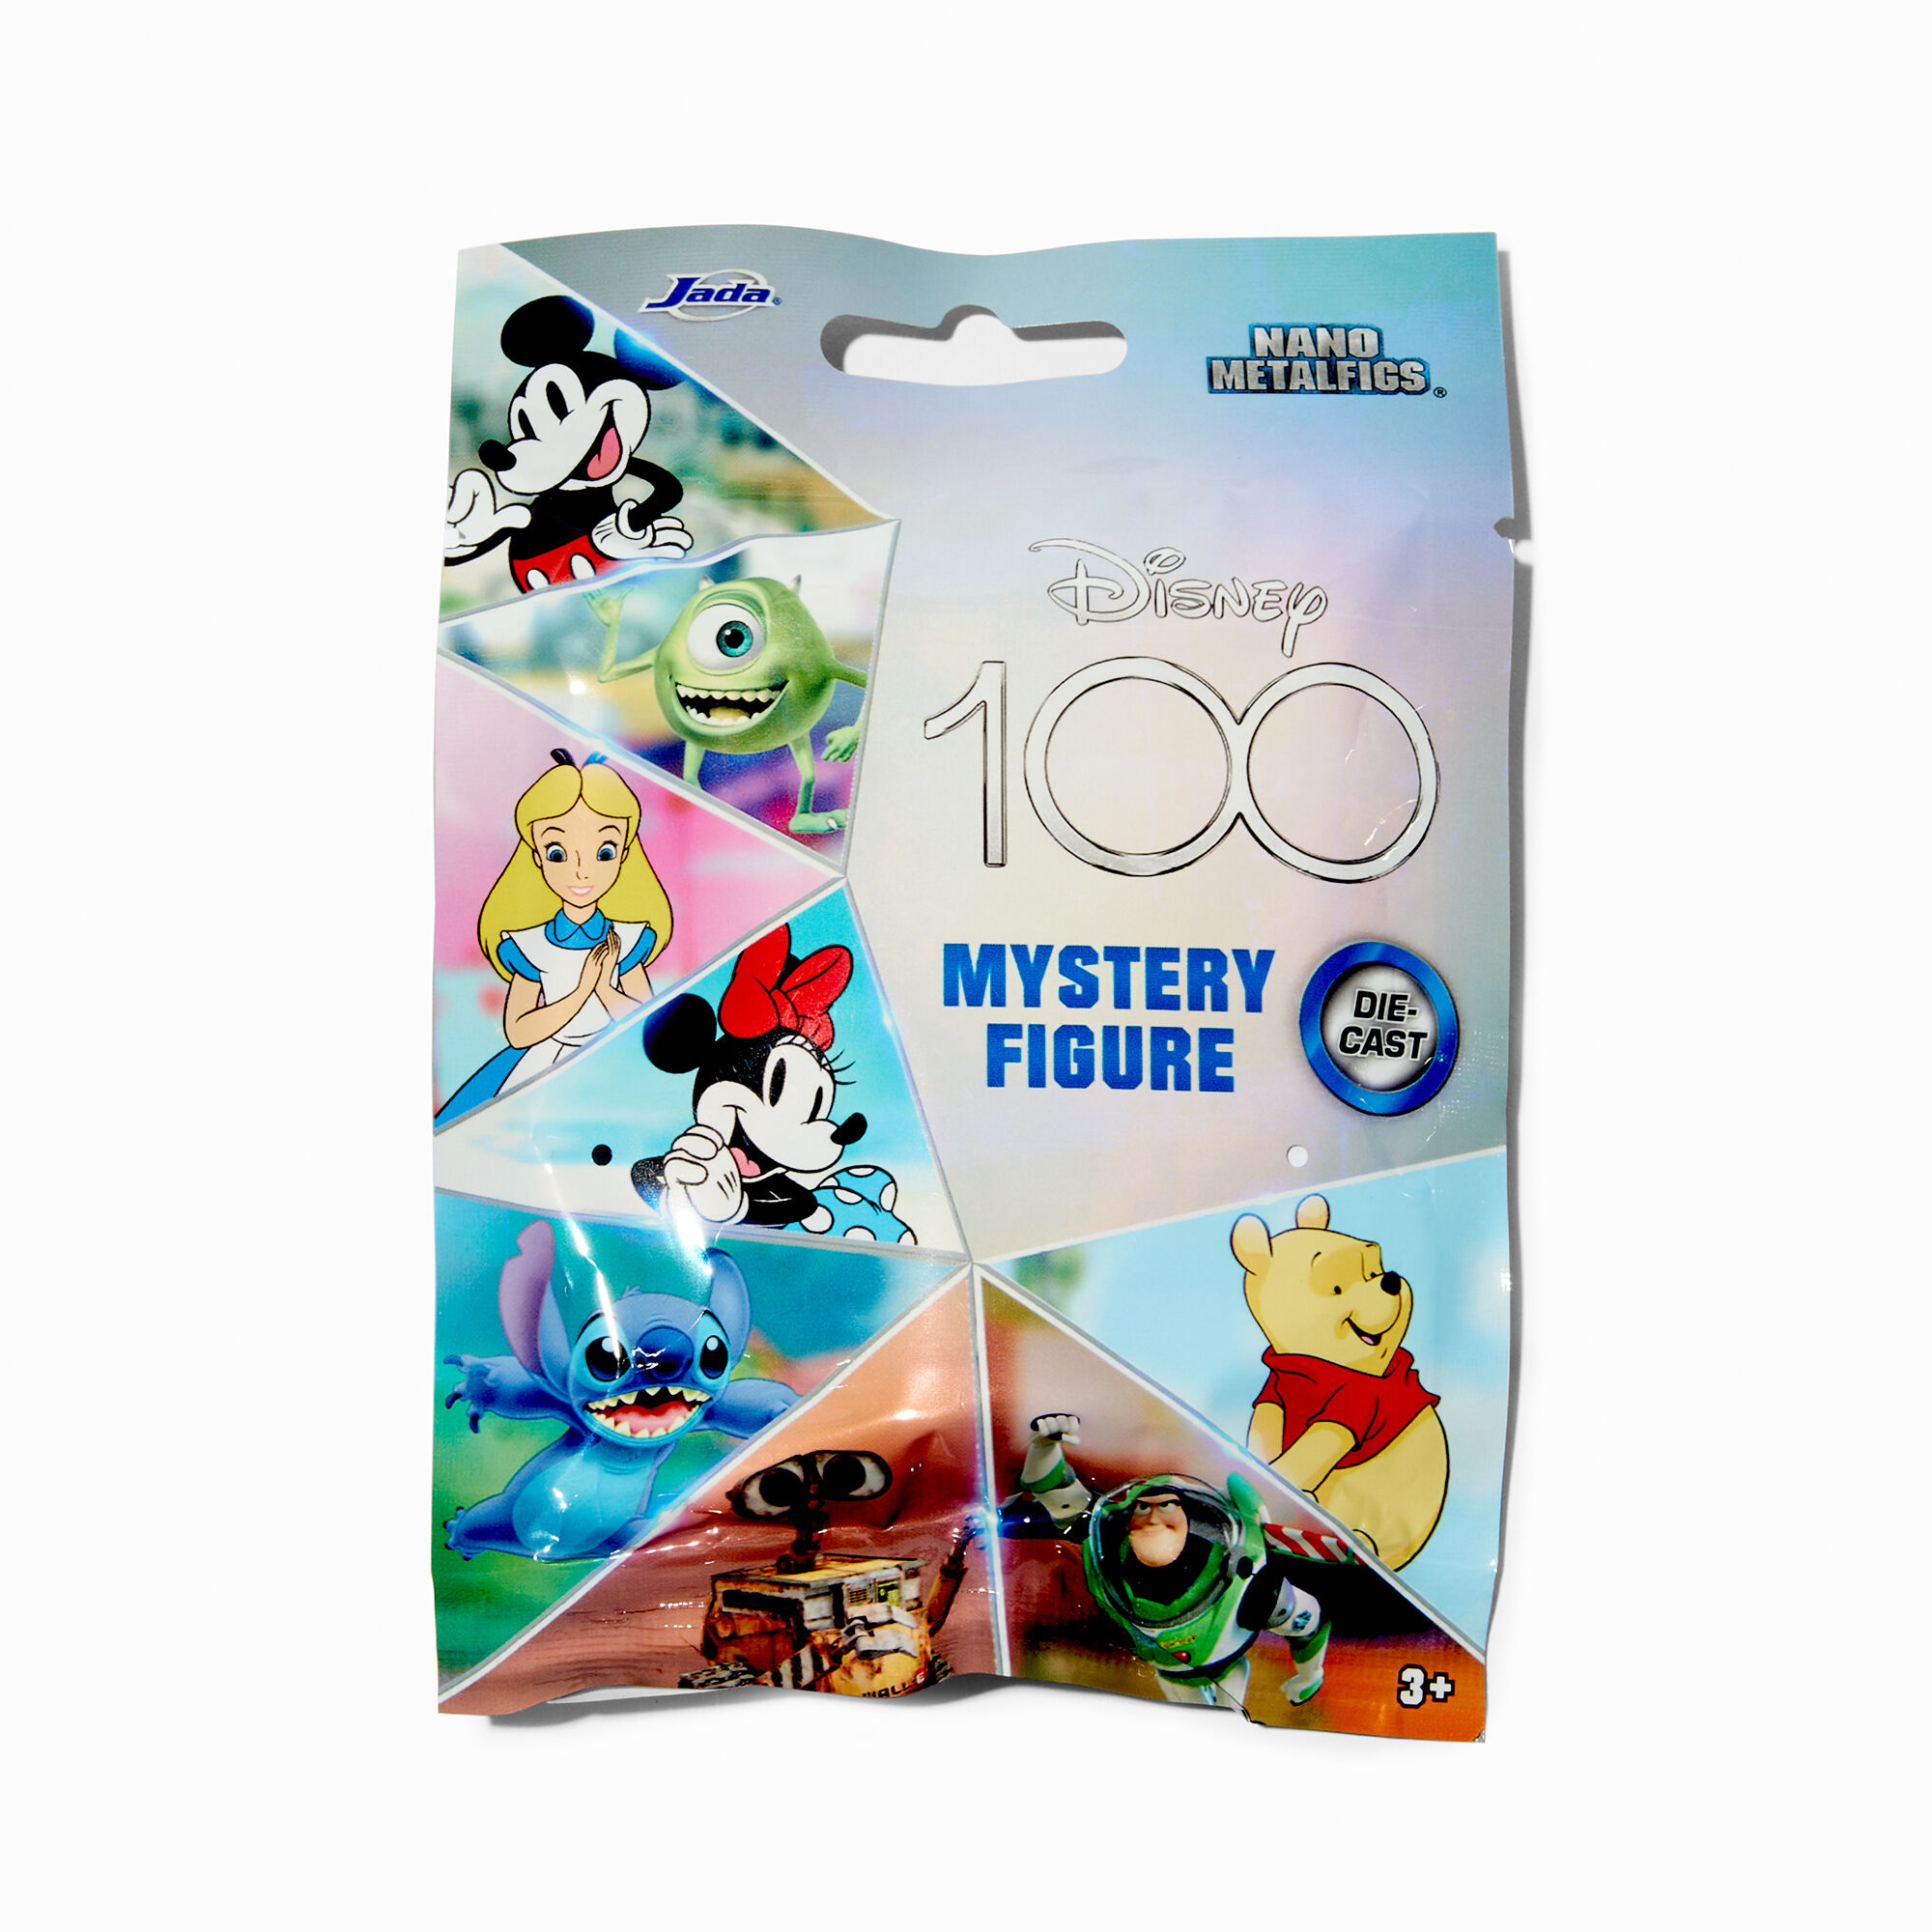 View Claires Disney 100 Mystery Figure Blind Bag Styles May Vary information